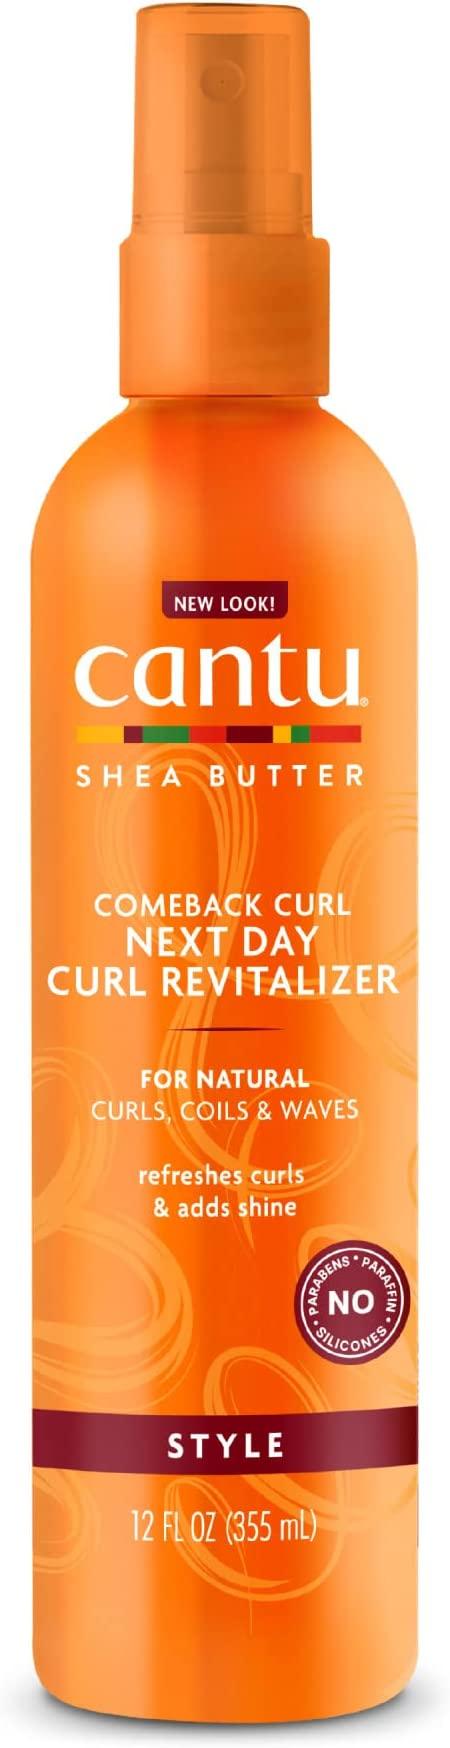 Cantu Shea Butter Comeback Curl Next Day Curl Revitalizer Spray for Natural Hair - 355 ml - African Beauty Online